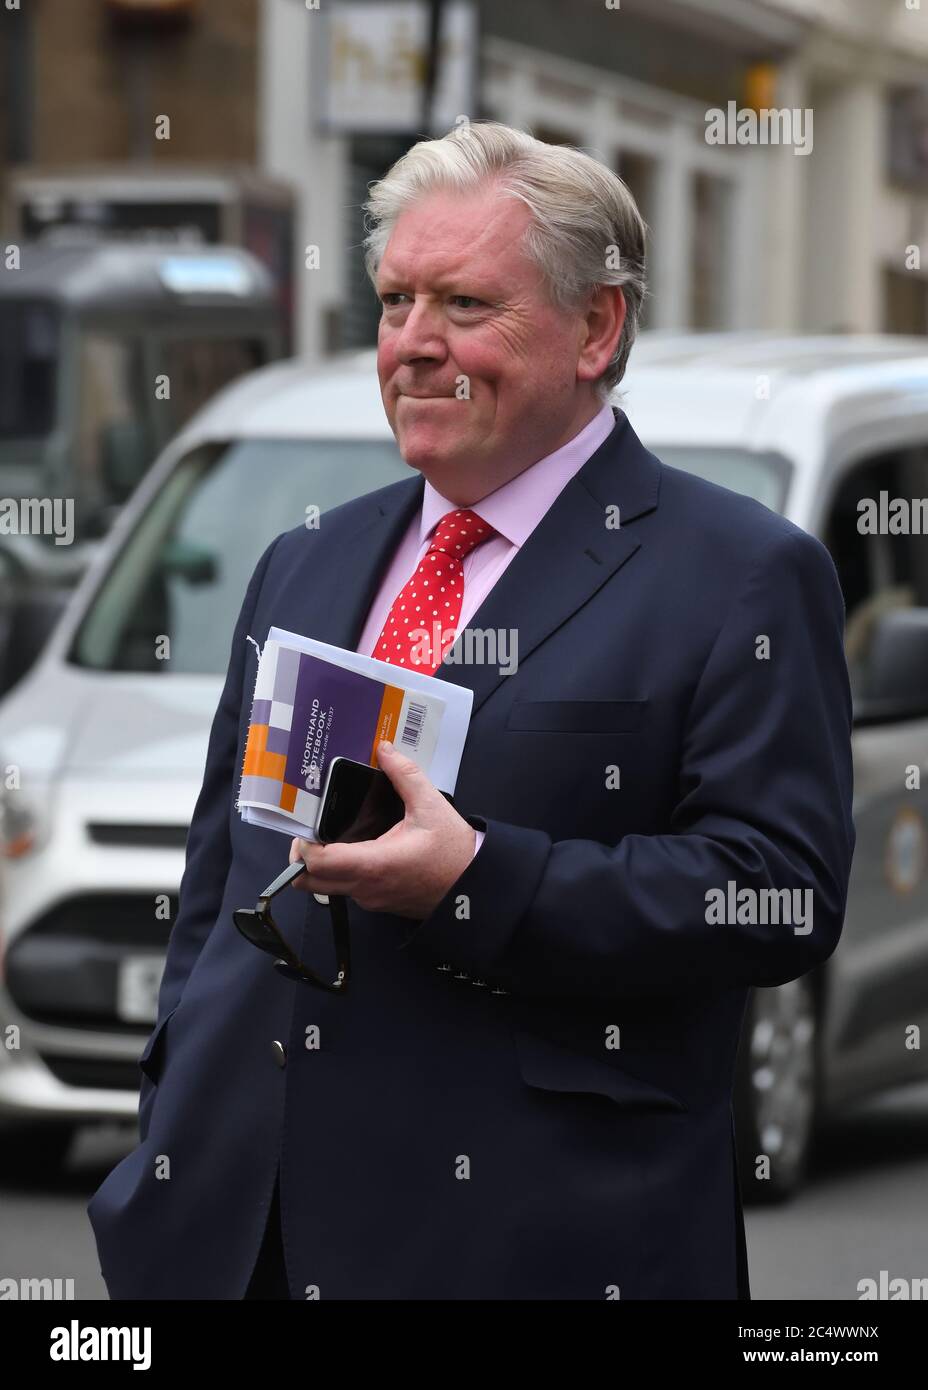 Bernard Ponsonby, Scottish broadcast political editor and journalist working on regional news and current affairs programming for STV. Stock Photo